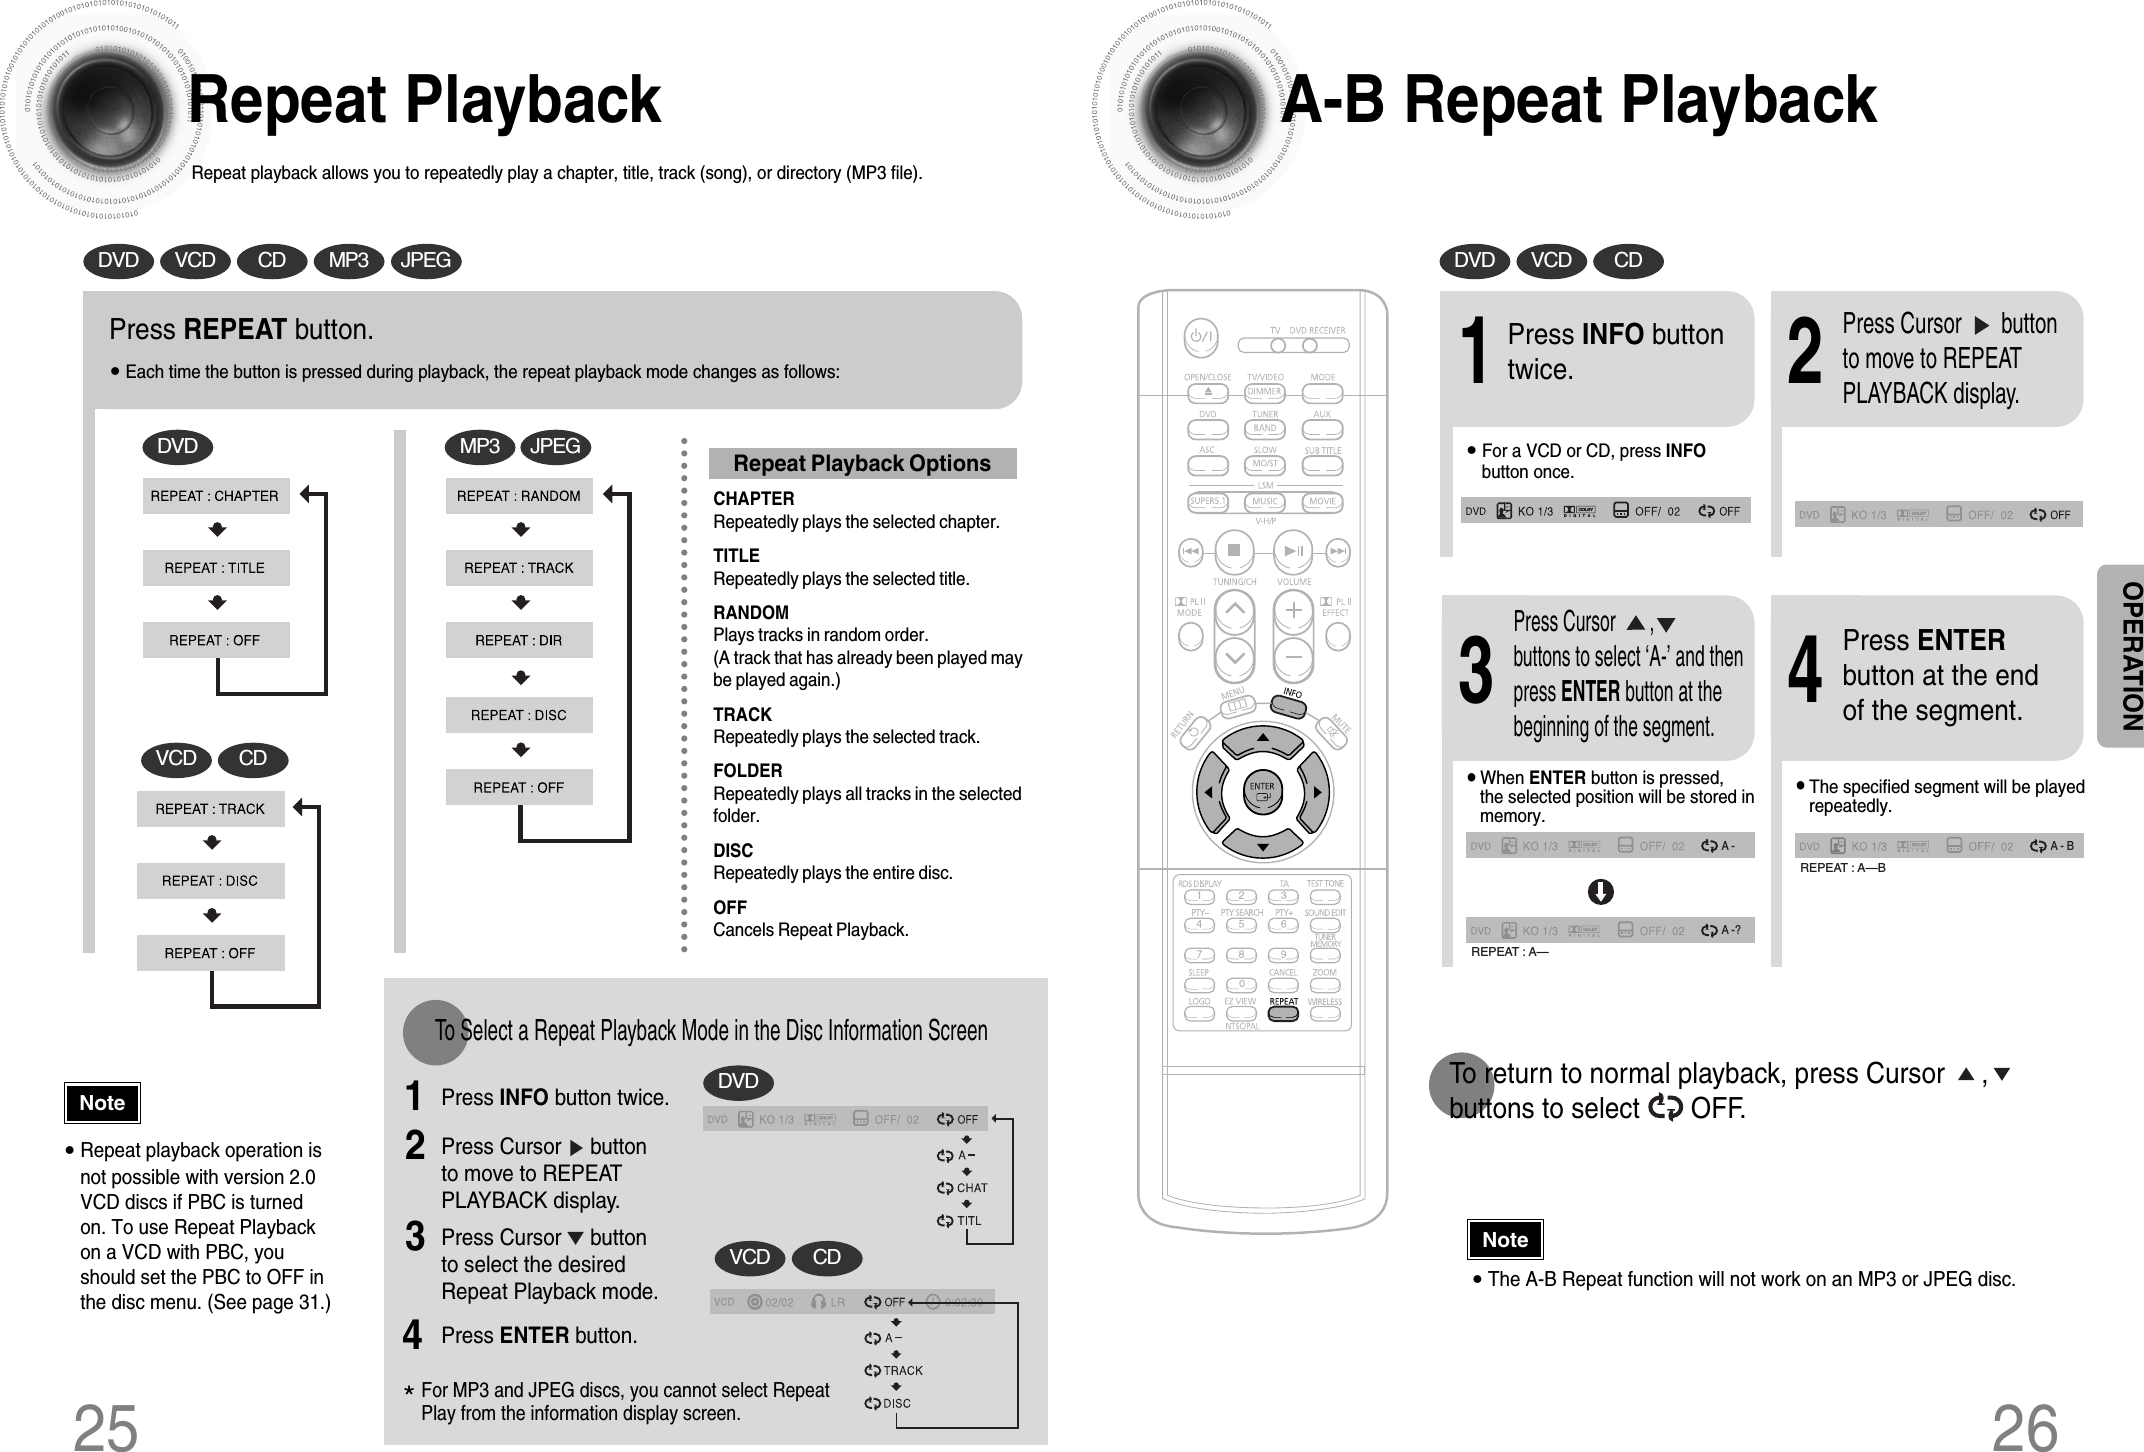 A-B Repeat Playback26•The A-B Repeat function will not work on an MP3 or JPEG disc.2Press Cursor       buttonto move to REPEATPLAYBACK display.•For a VCD or CD, press INFObutton once.1Press INFO buttontwice.A -A -?REPEAT : A—A - BREPEAT : A—B•The specified segment will be playedrepeatedly.4Press ENTERbutton at the endof the segment.•When ENTER button is pressed,the selected position will be stored inmemory.3Press Cursor       ,buttons to select ‘A-’ and thenpress ENTER button at thebeginning of the segment.To return to normal playback, press Cursor     ,     buttons to select       OFF.DVD VCD CDRepeat PlaybackRepeat playback allows you to repeatedly play a chapter, title, track (song), or directory (MP3 file).25Press REPEAT button.•Each time the button is pressed during playback, the repeat playback mode changes as follows:DVDVCD CDMP3 JPEG•Repeat playback operation isnot possible with version 2.0VCD discs if PBC is turnedon. To use Repeat Playbackon a VCD with PBC, youshould set the PBC to OFF inthe disc menu. (See page 31.)CHAPTERRepeatedly plays the selected chapter.TITLERepeatedly plays the selected title.RANDOMPlays tracks in random order.(A track that has already been played maybe played again.)TRACKRepeatedly plays the selected track.FOLDERRepeatedly plays all tracks in the selectedfolder.DISCRepeatedly plays the entire disc.OFFCancels Repeat Playback.To Select a Repeat Playback Mode in the Disc Information ScreenPress INFO button twice.1Press Cursor     buttonto move to REPEATPLAYBACK display.2Press Cursor     buttonto select the desiredRepeat Playback mode.3DVDVCD CD*For MP3 and JPEG discs, you cannot select RepeatPlay from the information display screen.Press ENTER button. 4DVD VCD CD MP3 JPEGRepeat Playback OptionsNoteNoteOPERATION